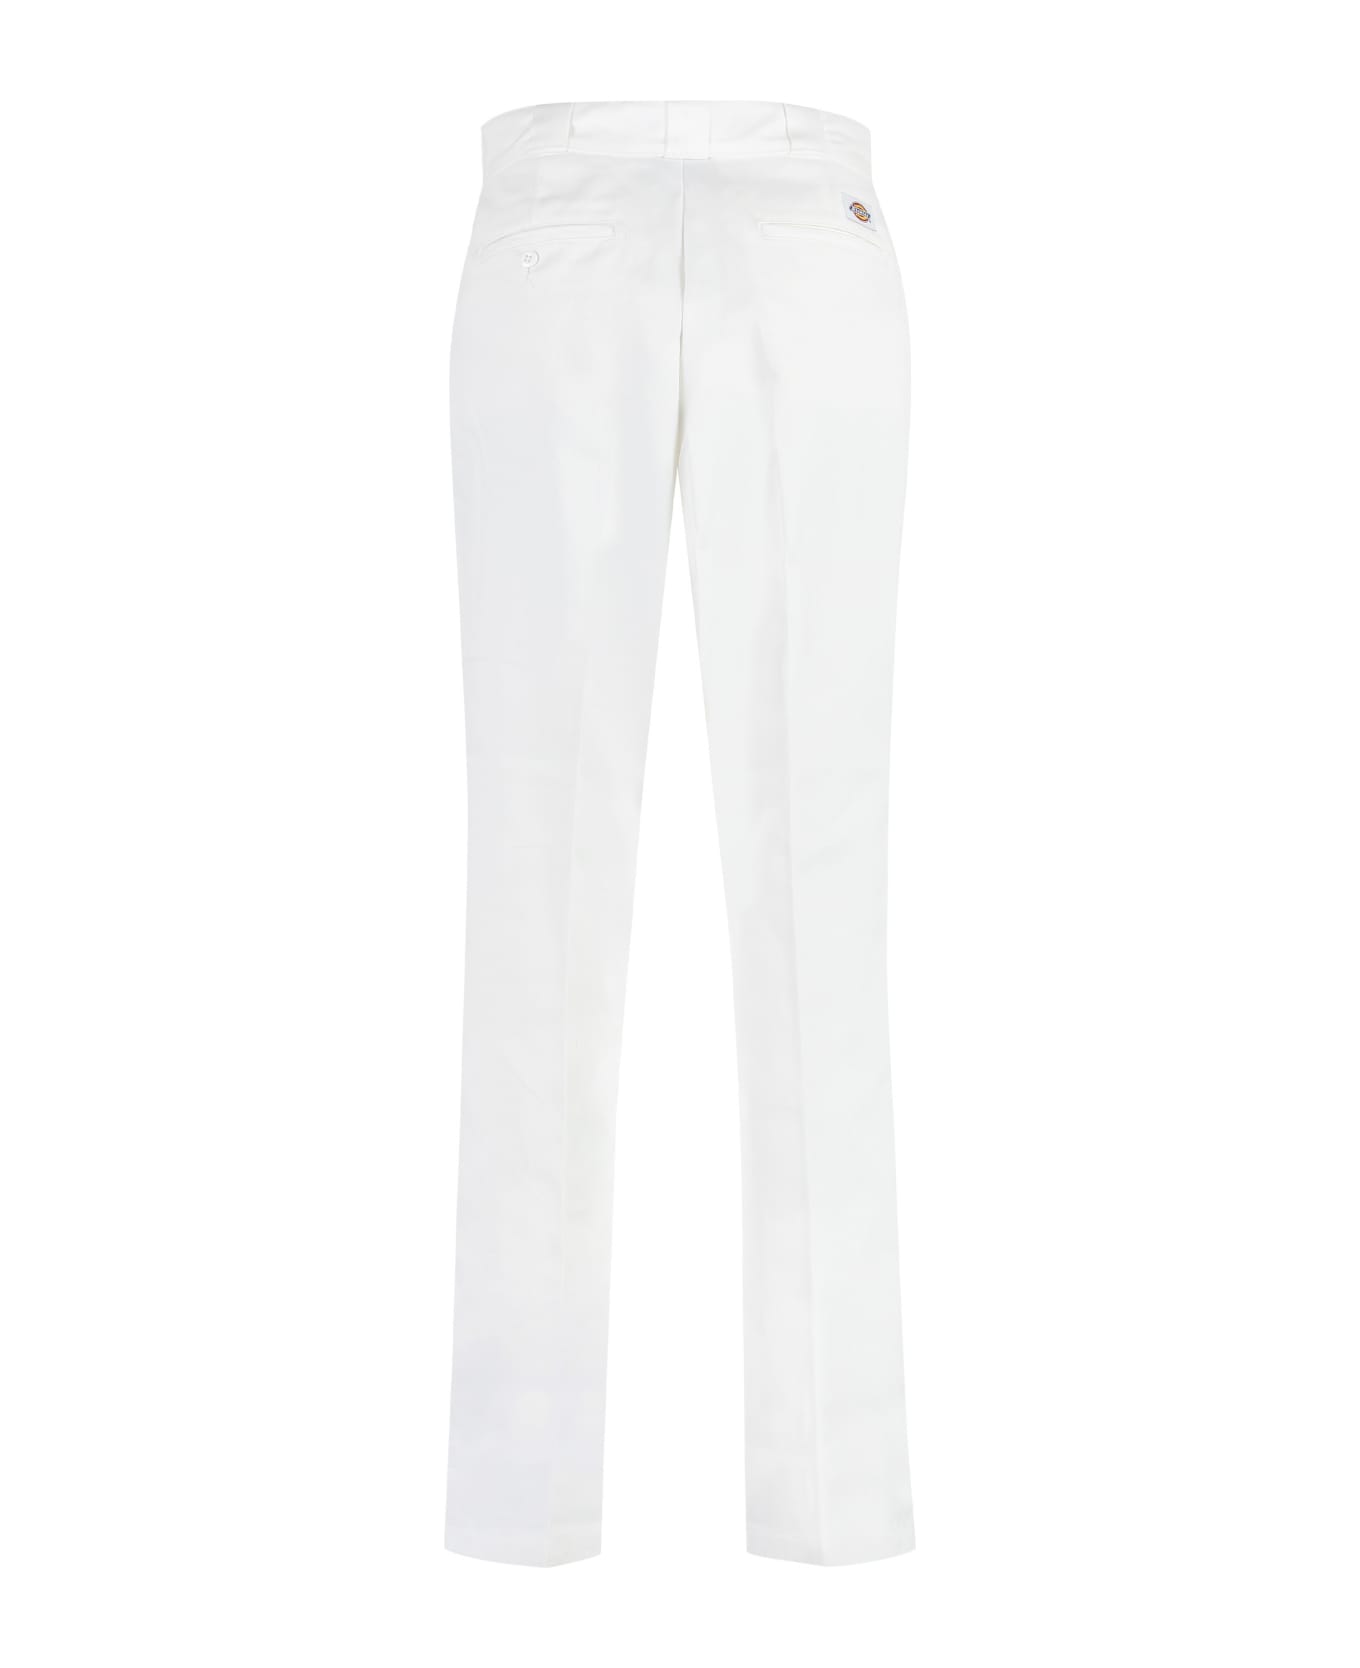 Dickies 874 Cotton-blend Trousers - White